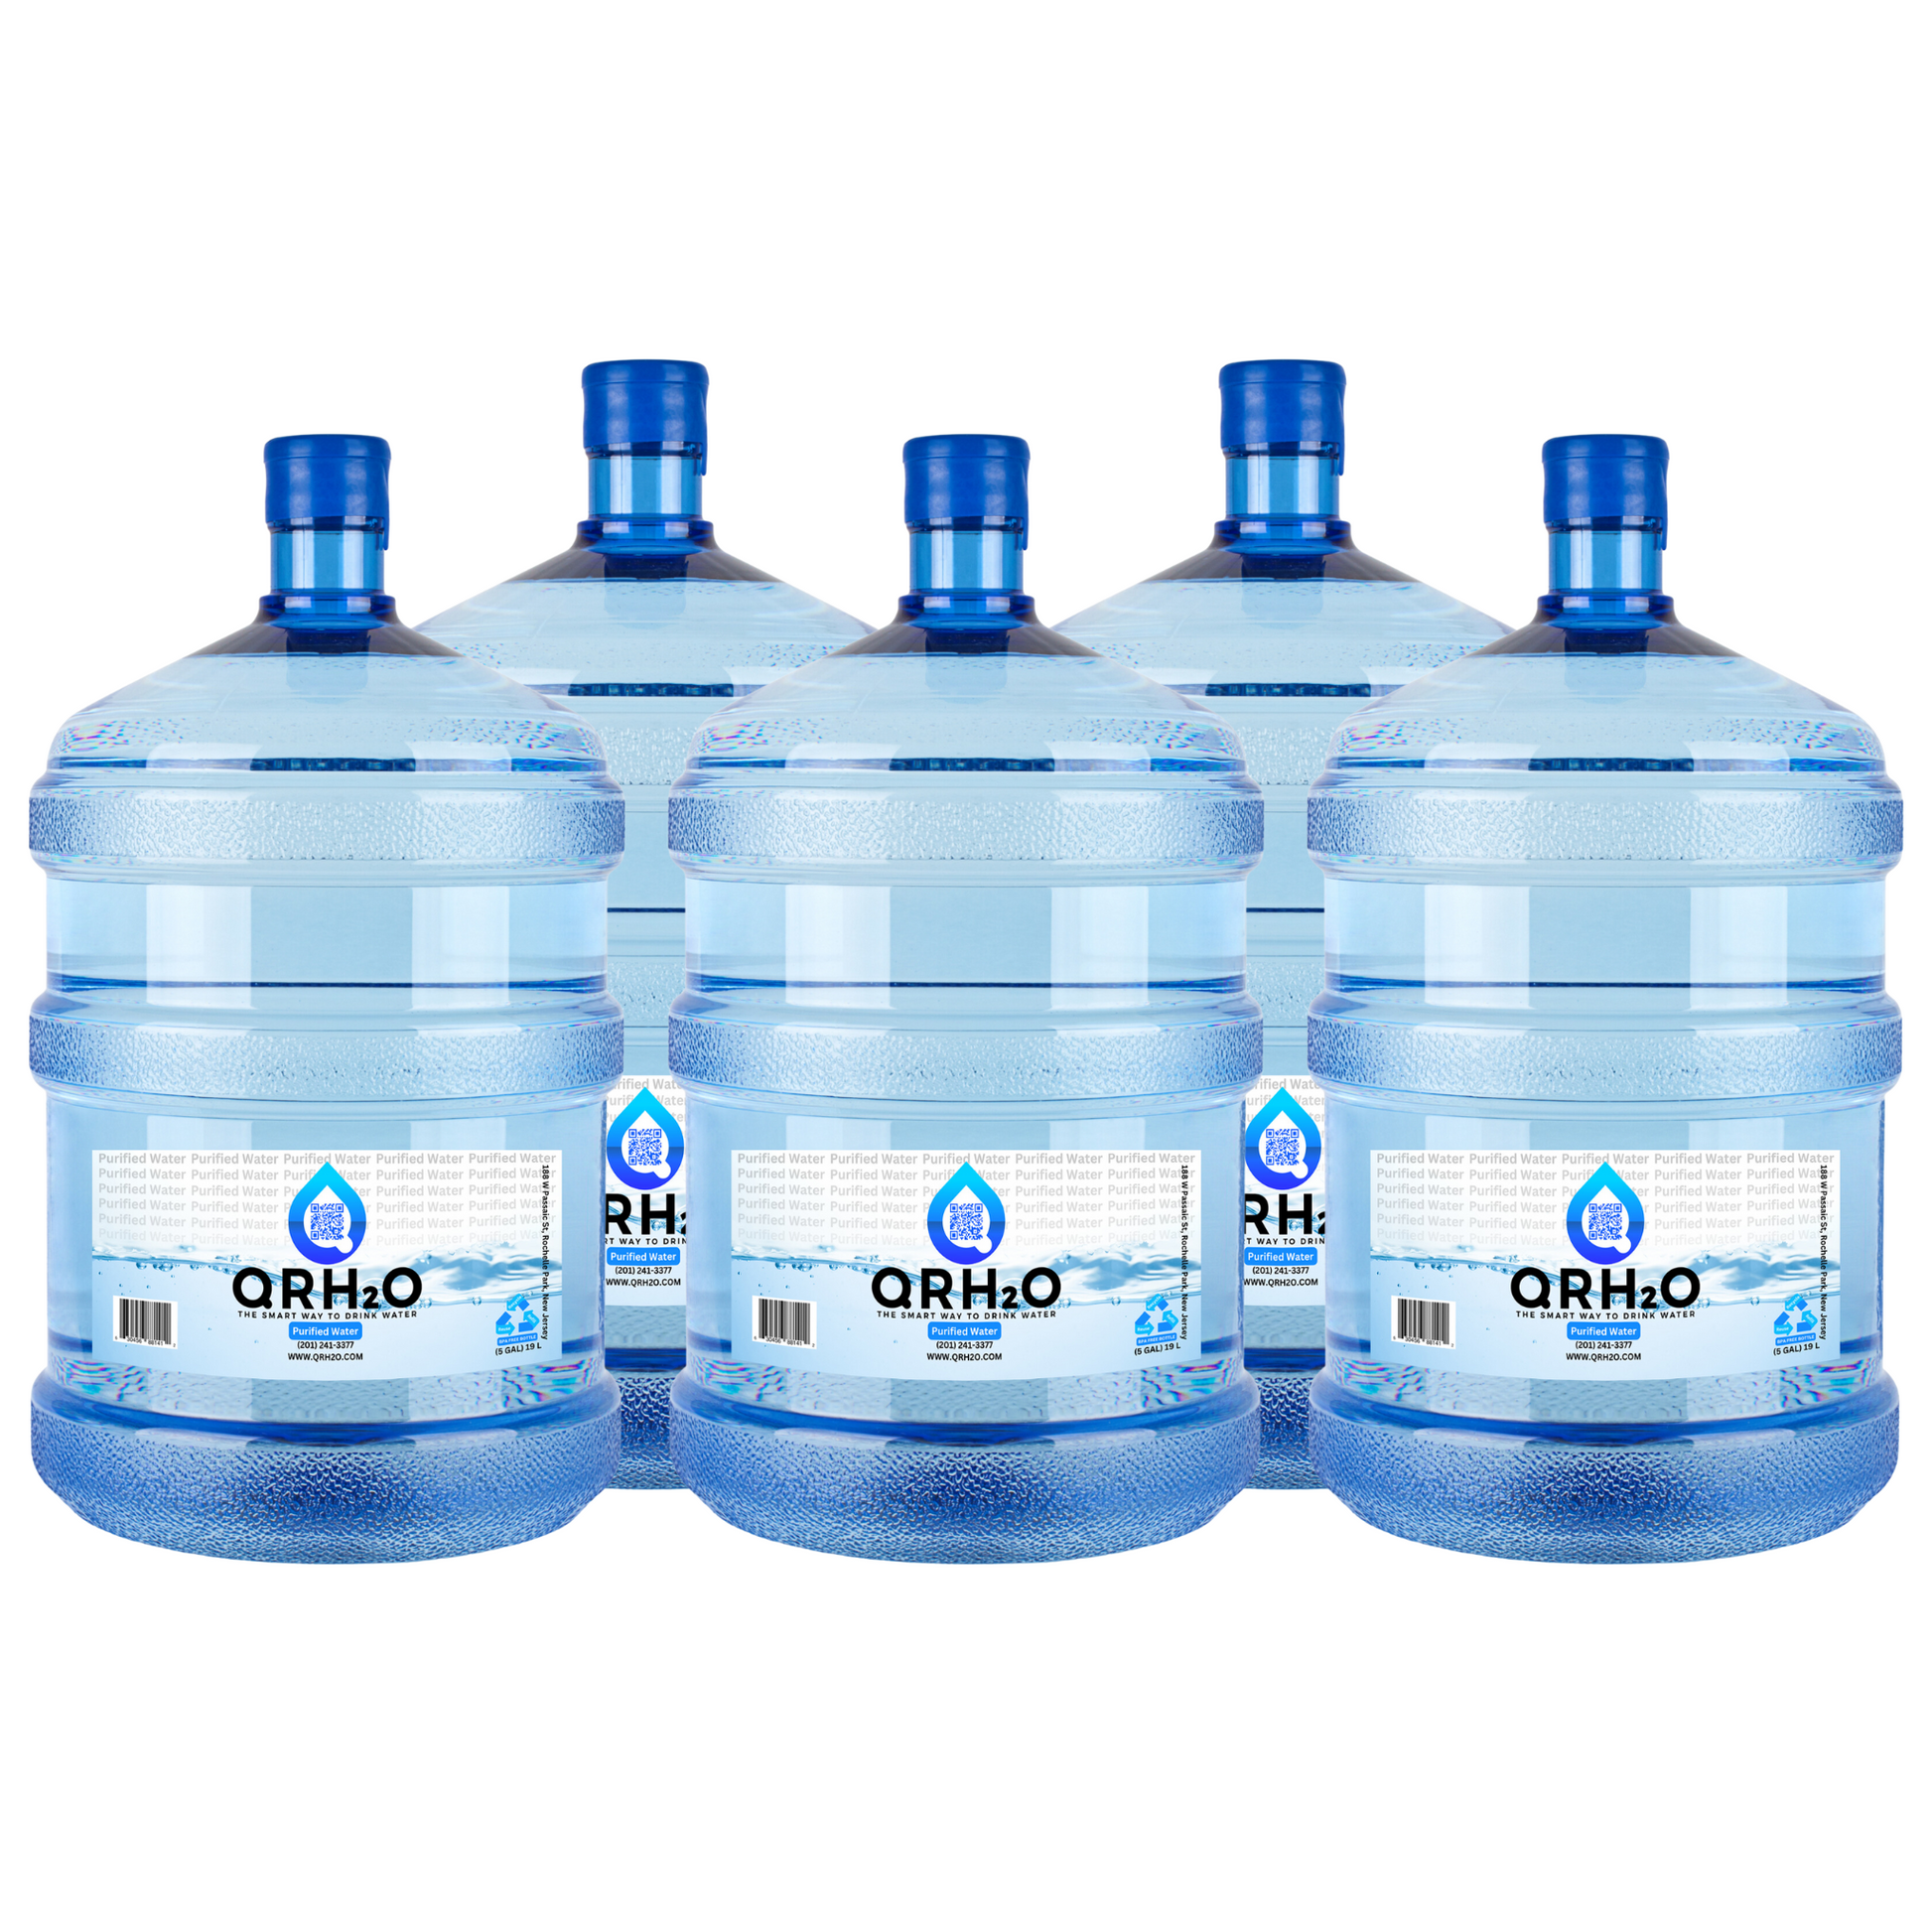 Experience the crisp taste of pure water with 5 of our 5-gallon 100% purified water bottles